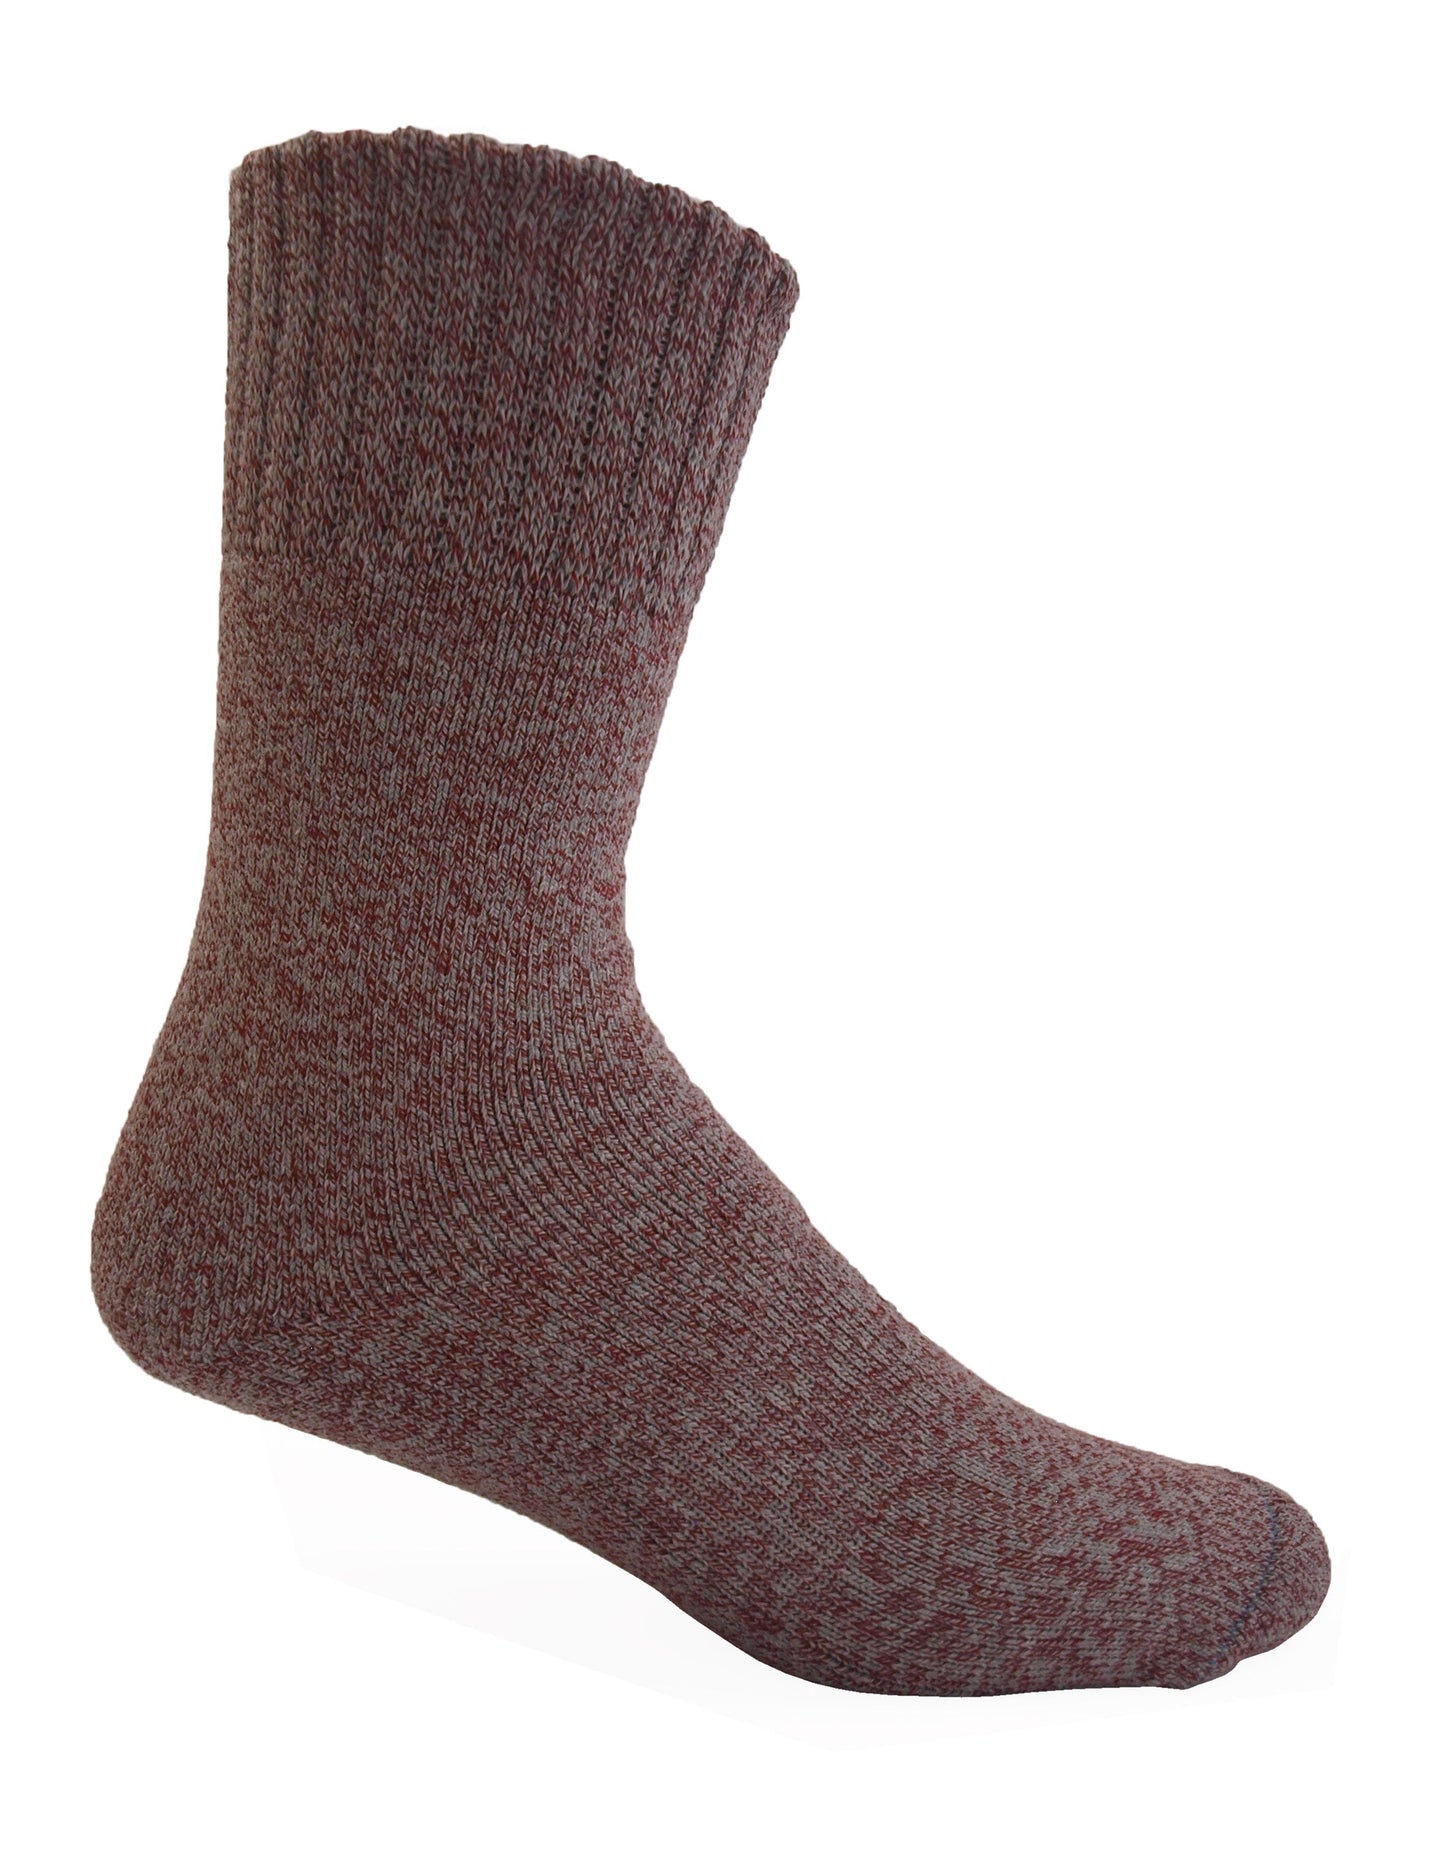 Socks Bamboo Hiker Charcoal General Bamboo Textiles M4-6 W 6-8/ Red Marle 